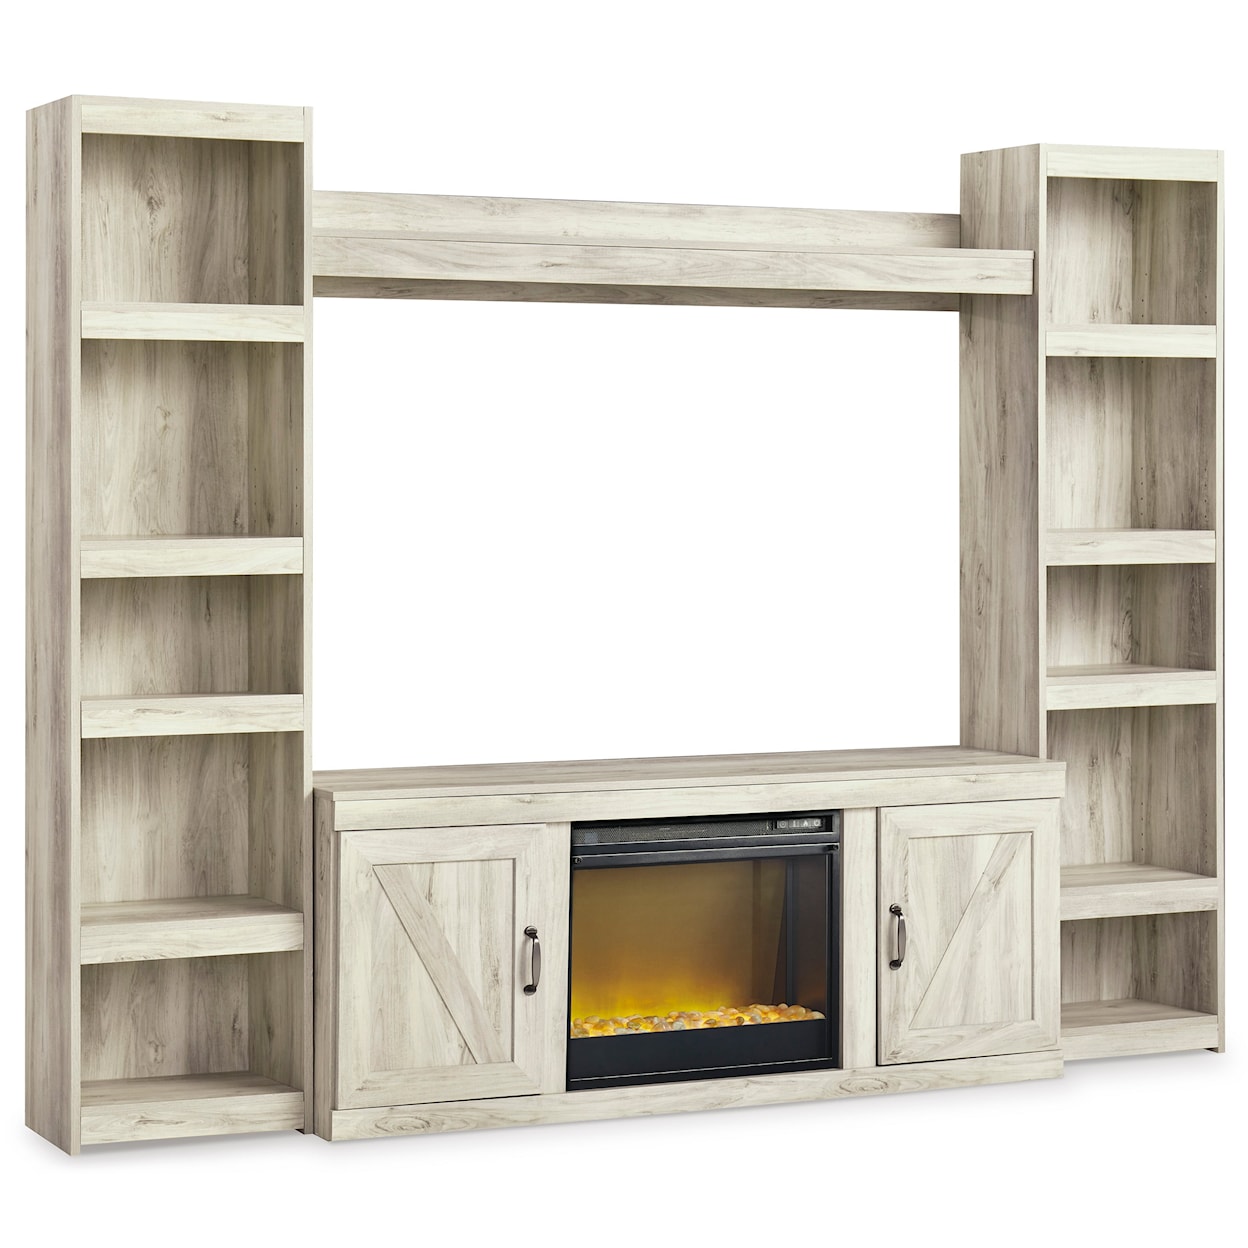 Signature Design by Ashley Bellaby Entertainment Center with Fireplace